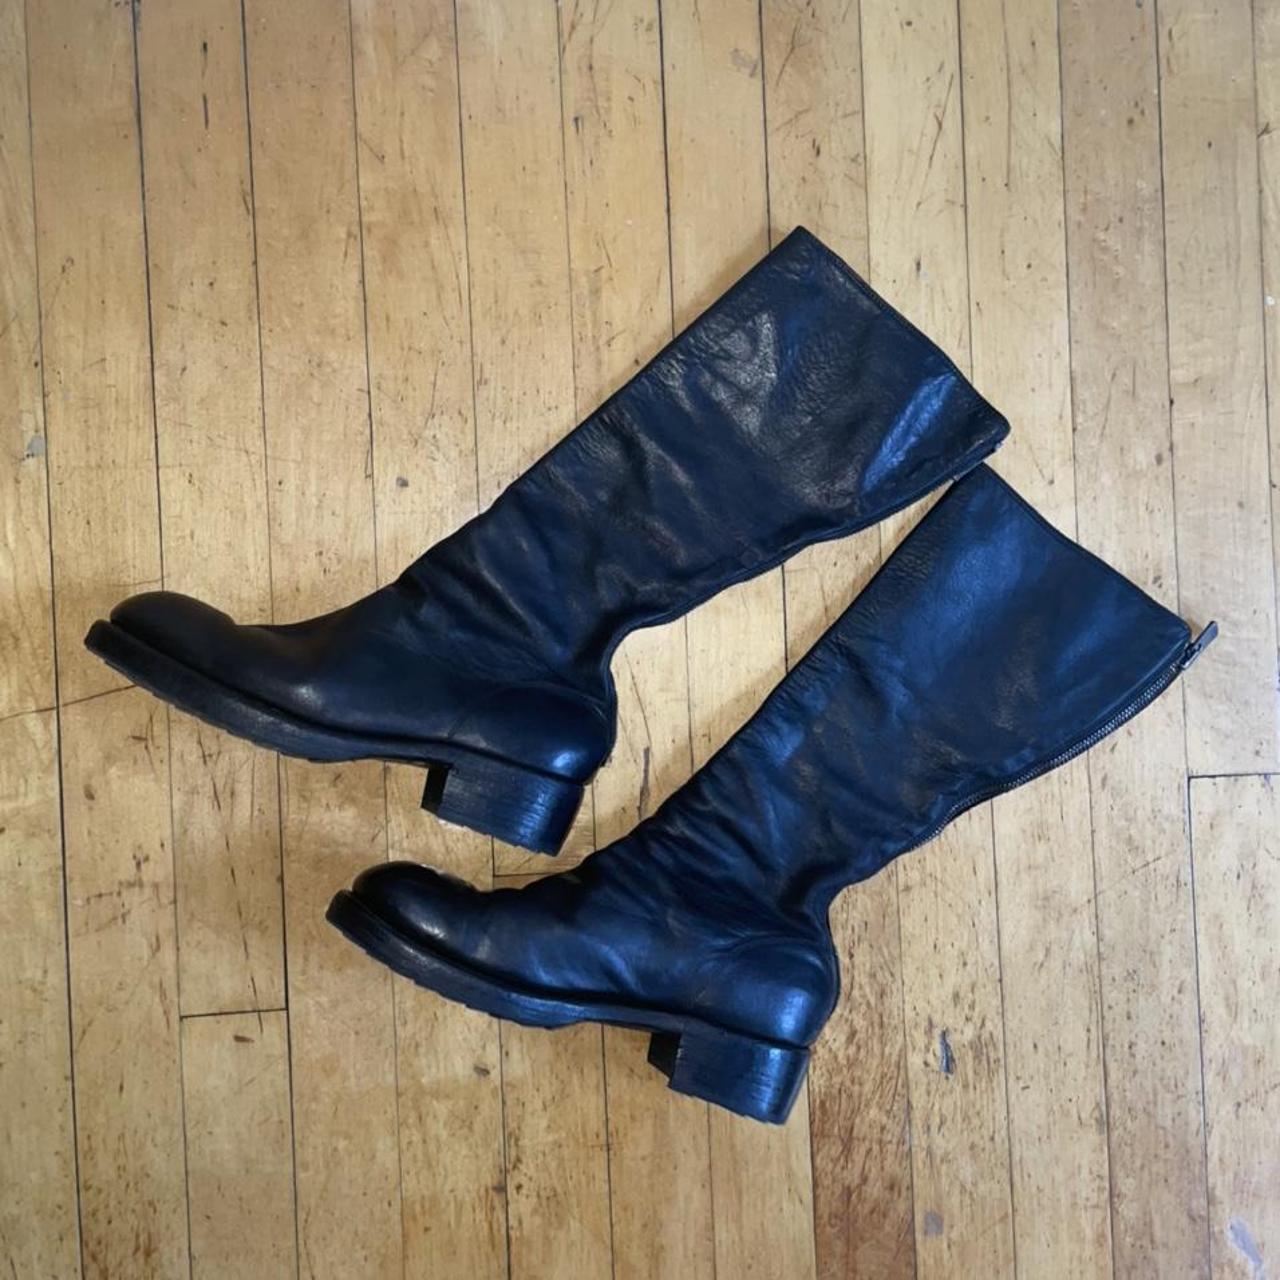 Product Image 1 - Black mid calf guidi boots.